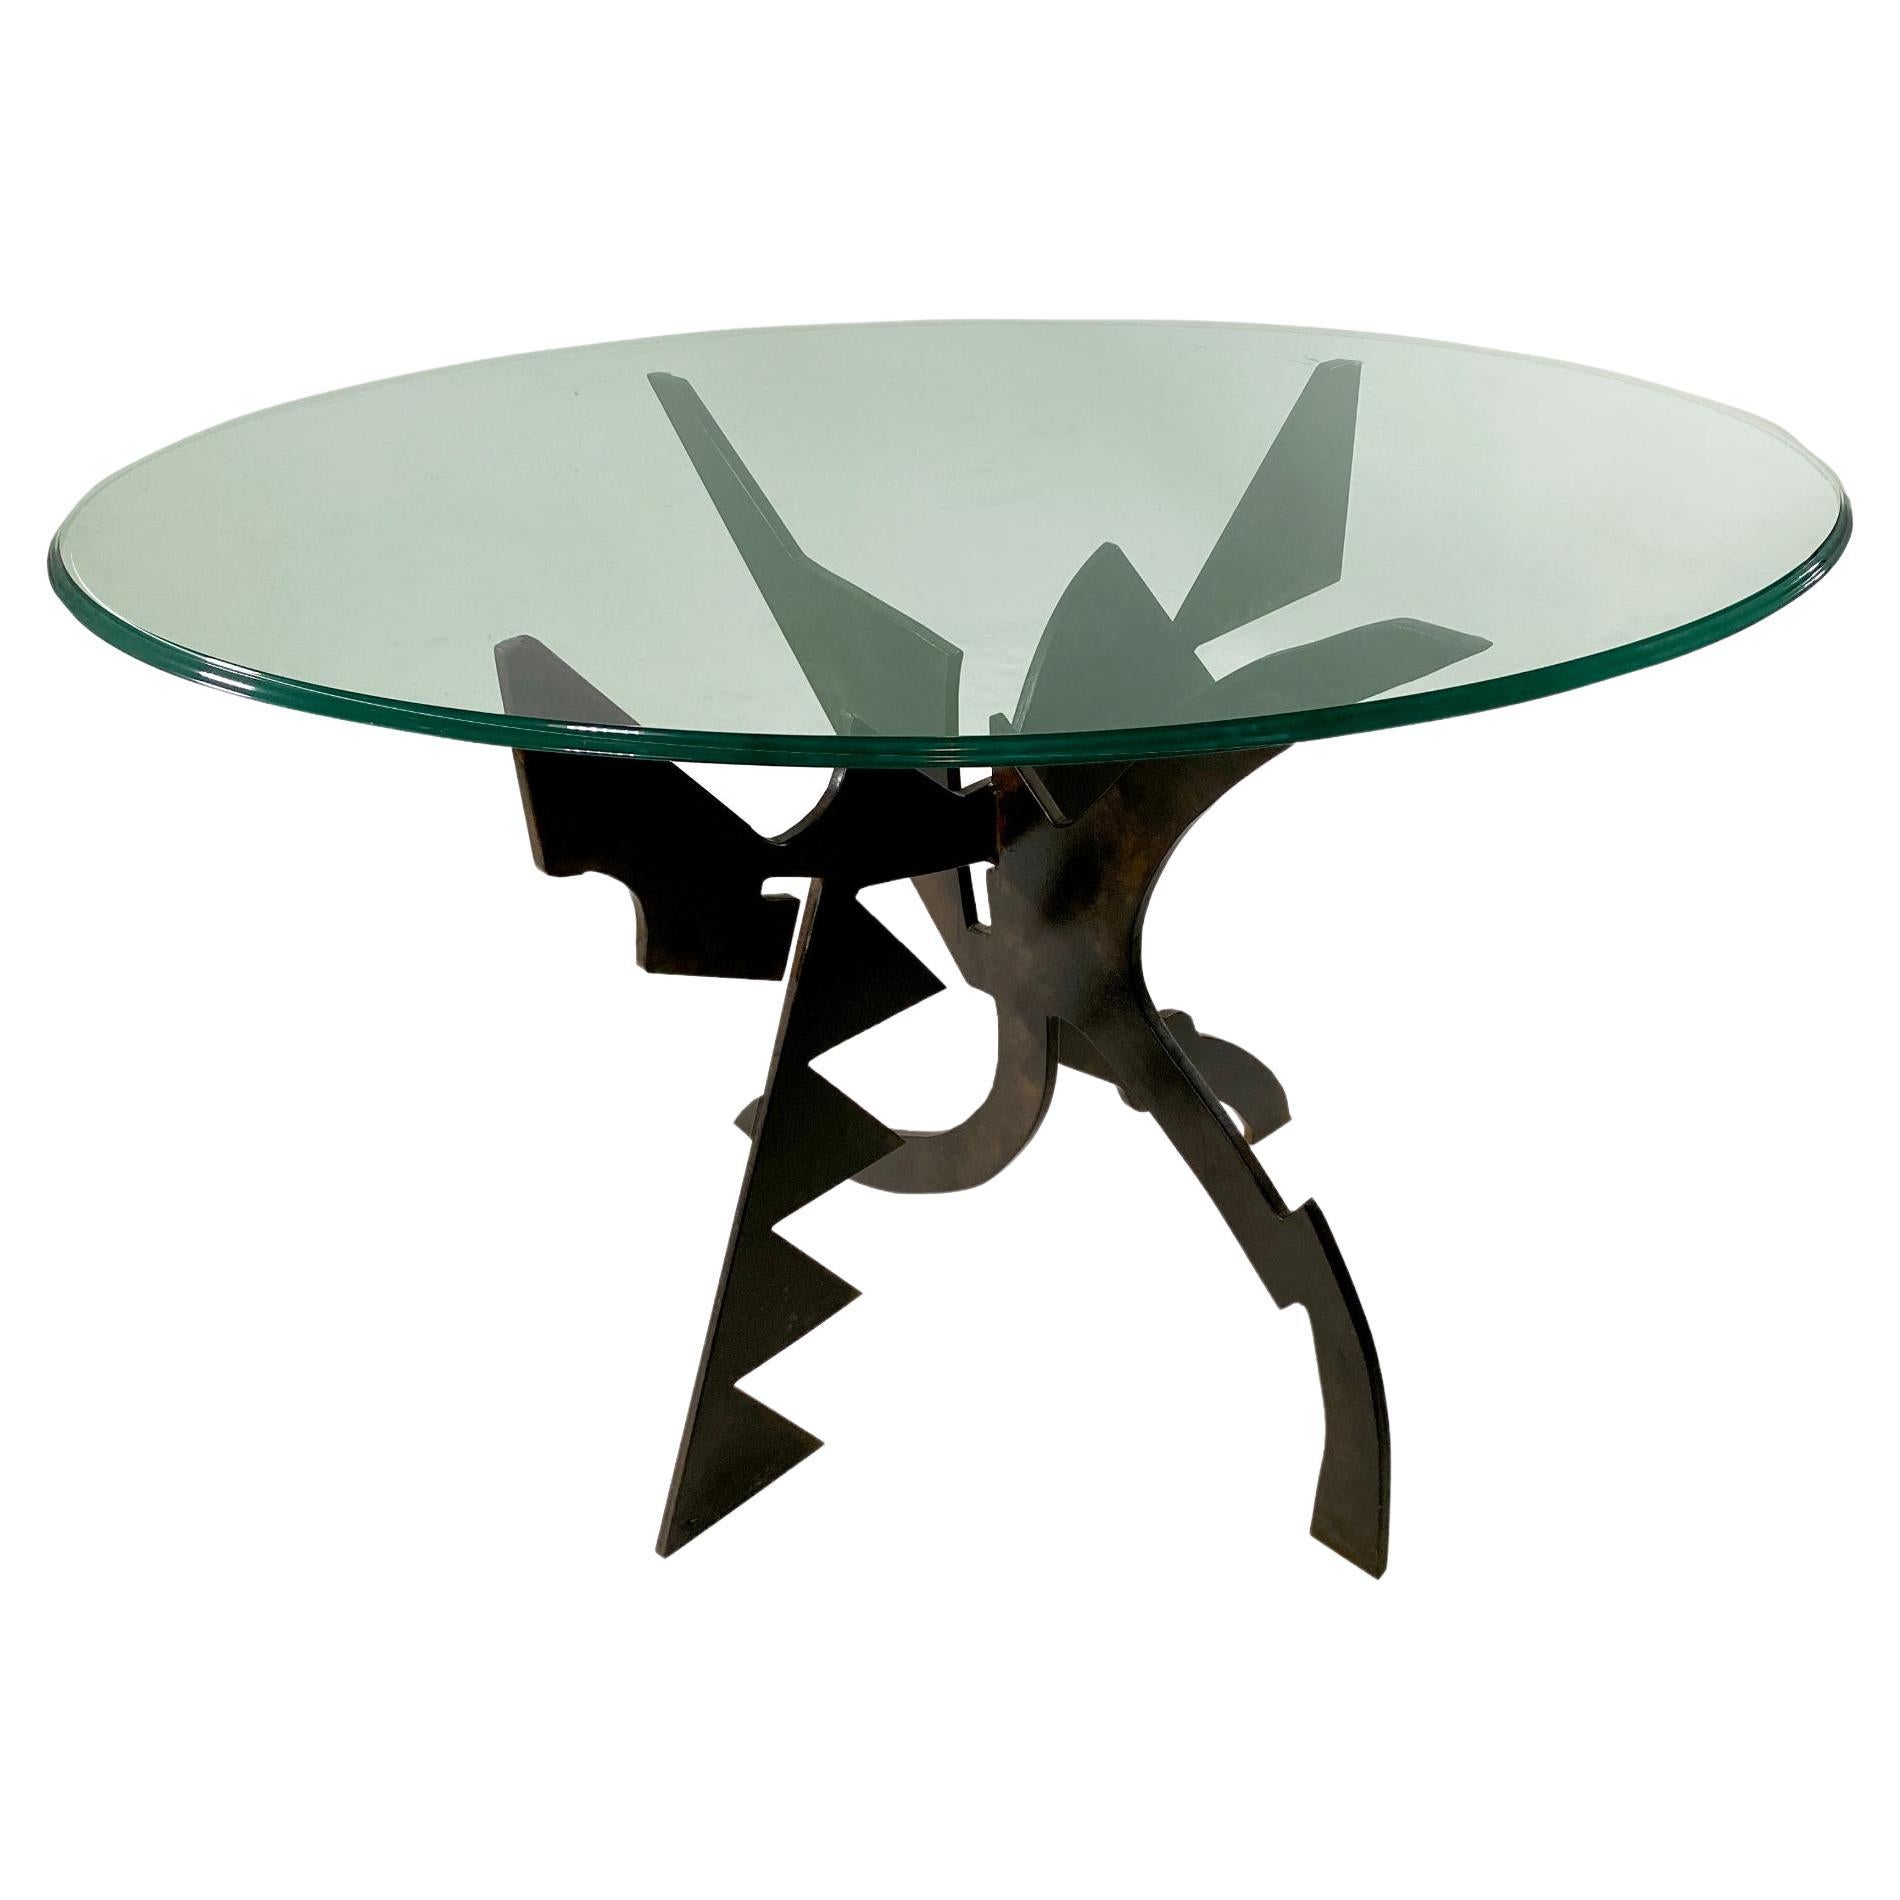 Italian Modern Patinated Bronze and Glass Cafe Table, Pucci de Rossi For Sale